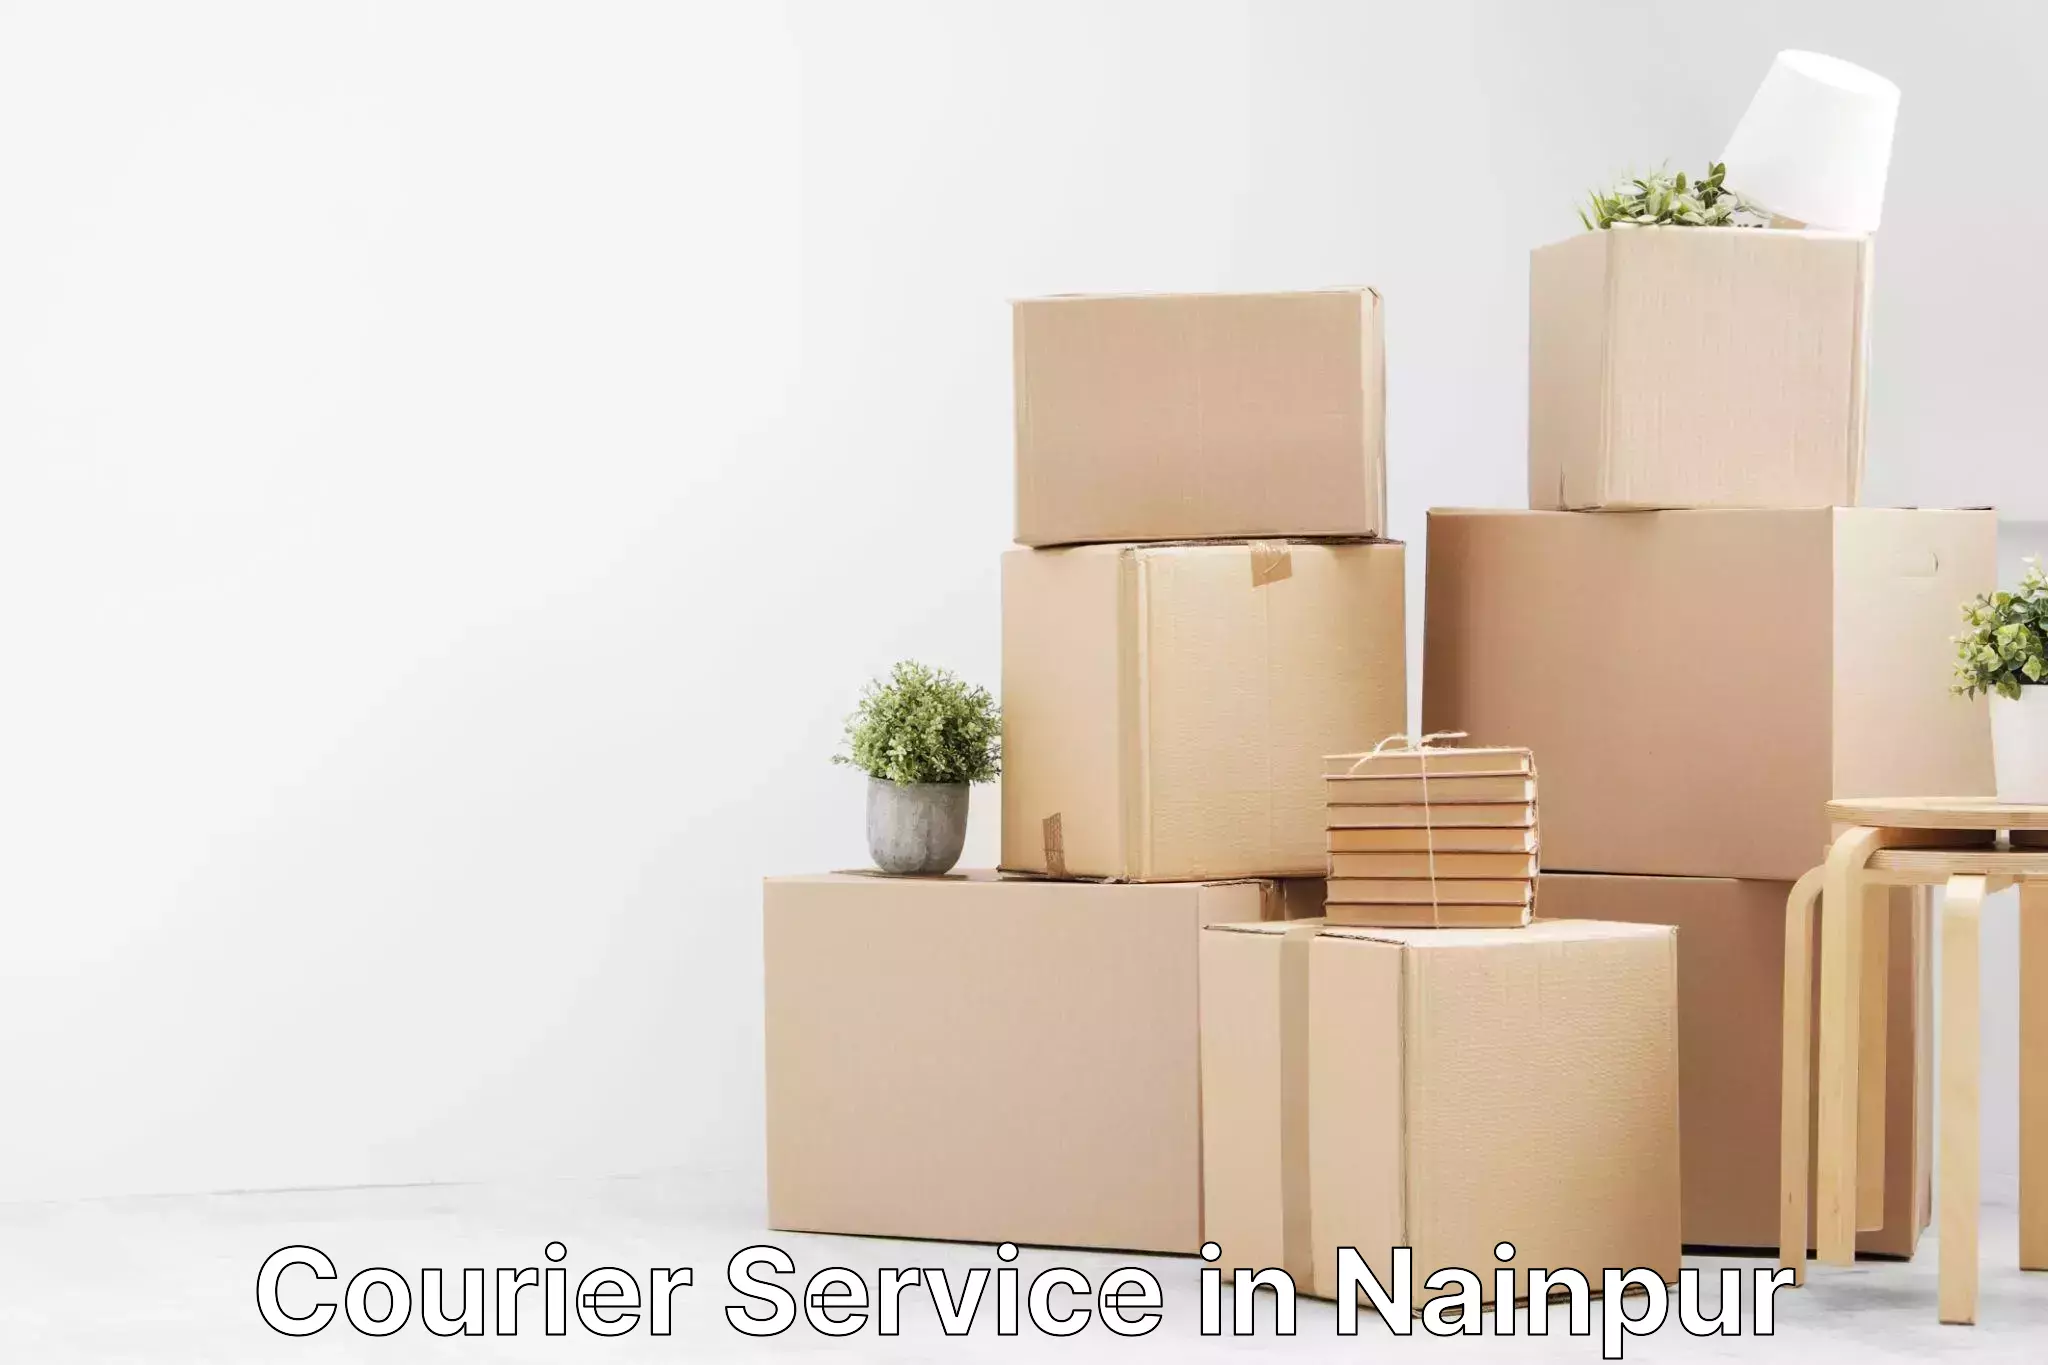 Multi-service courier options in Nainpur